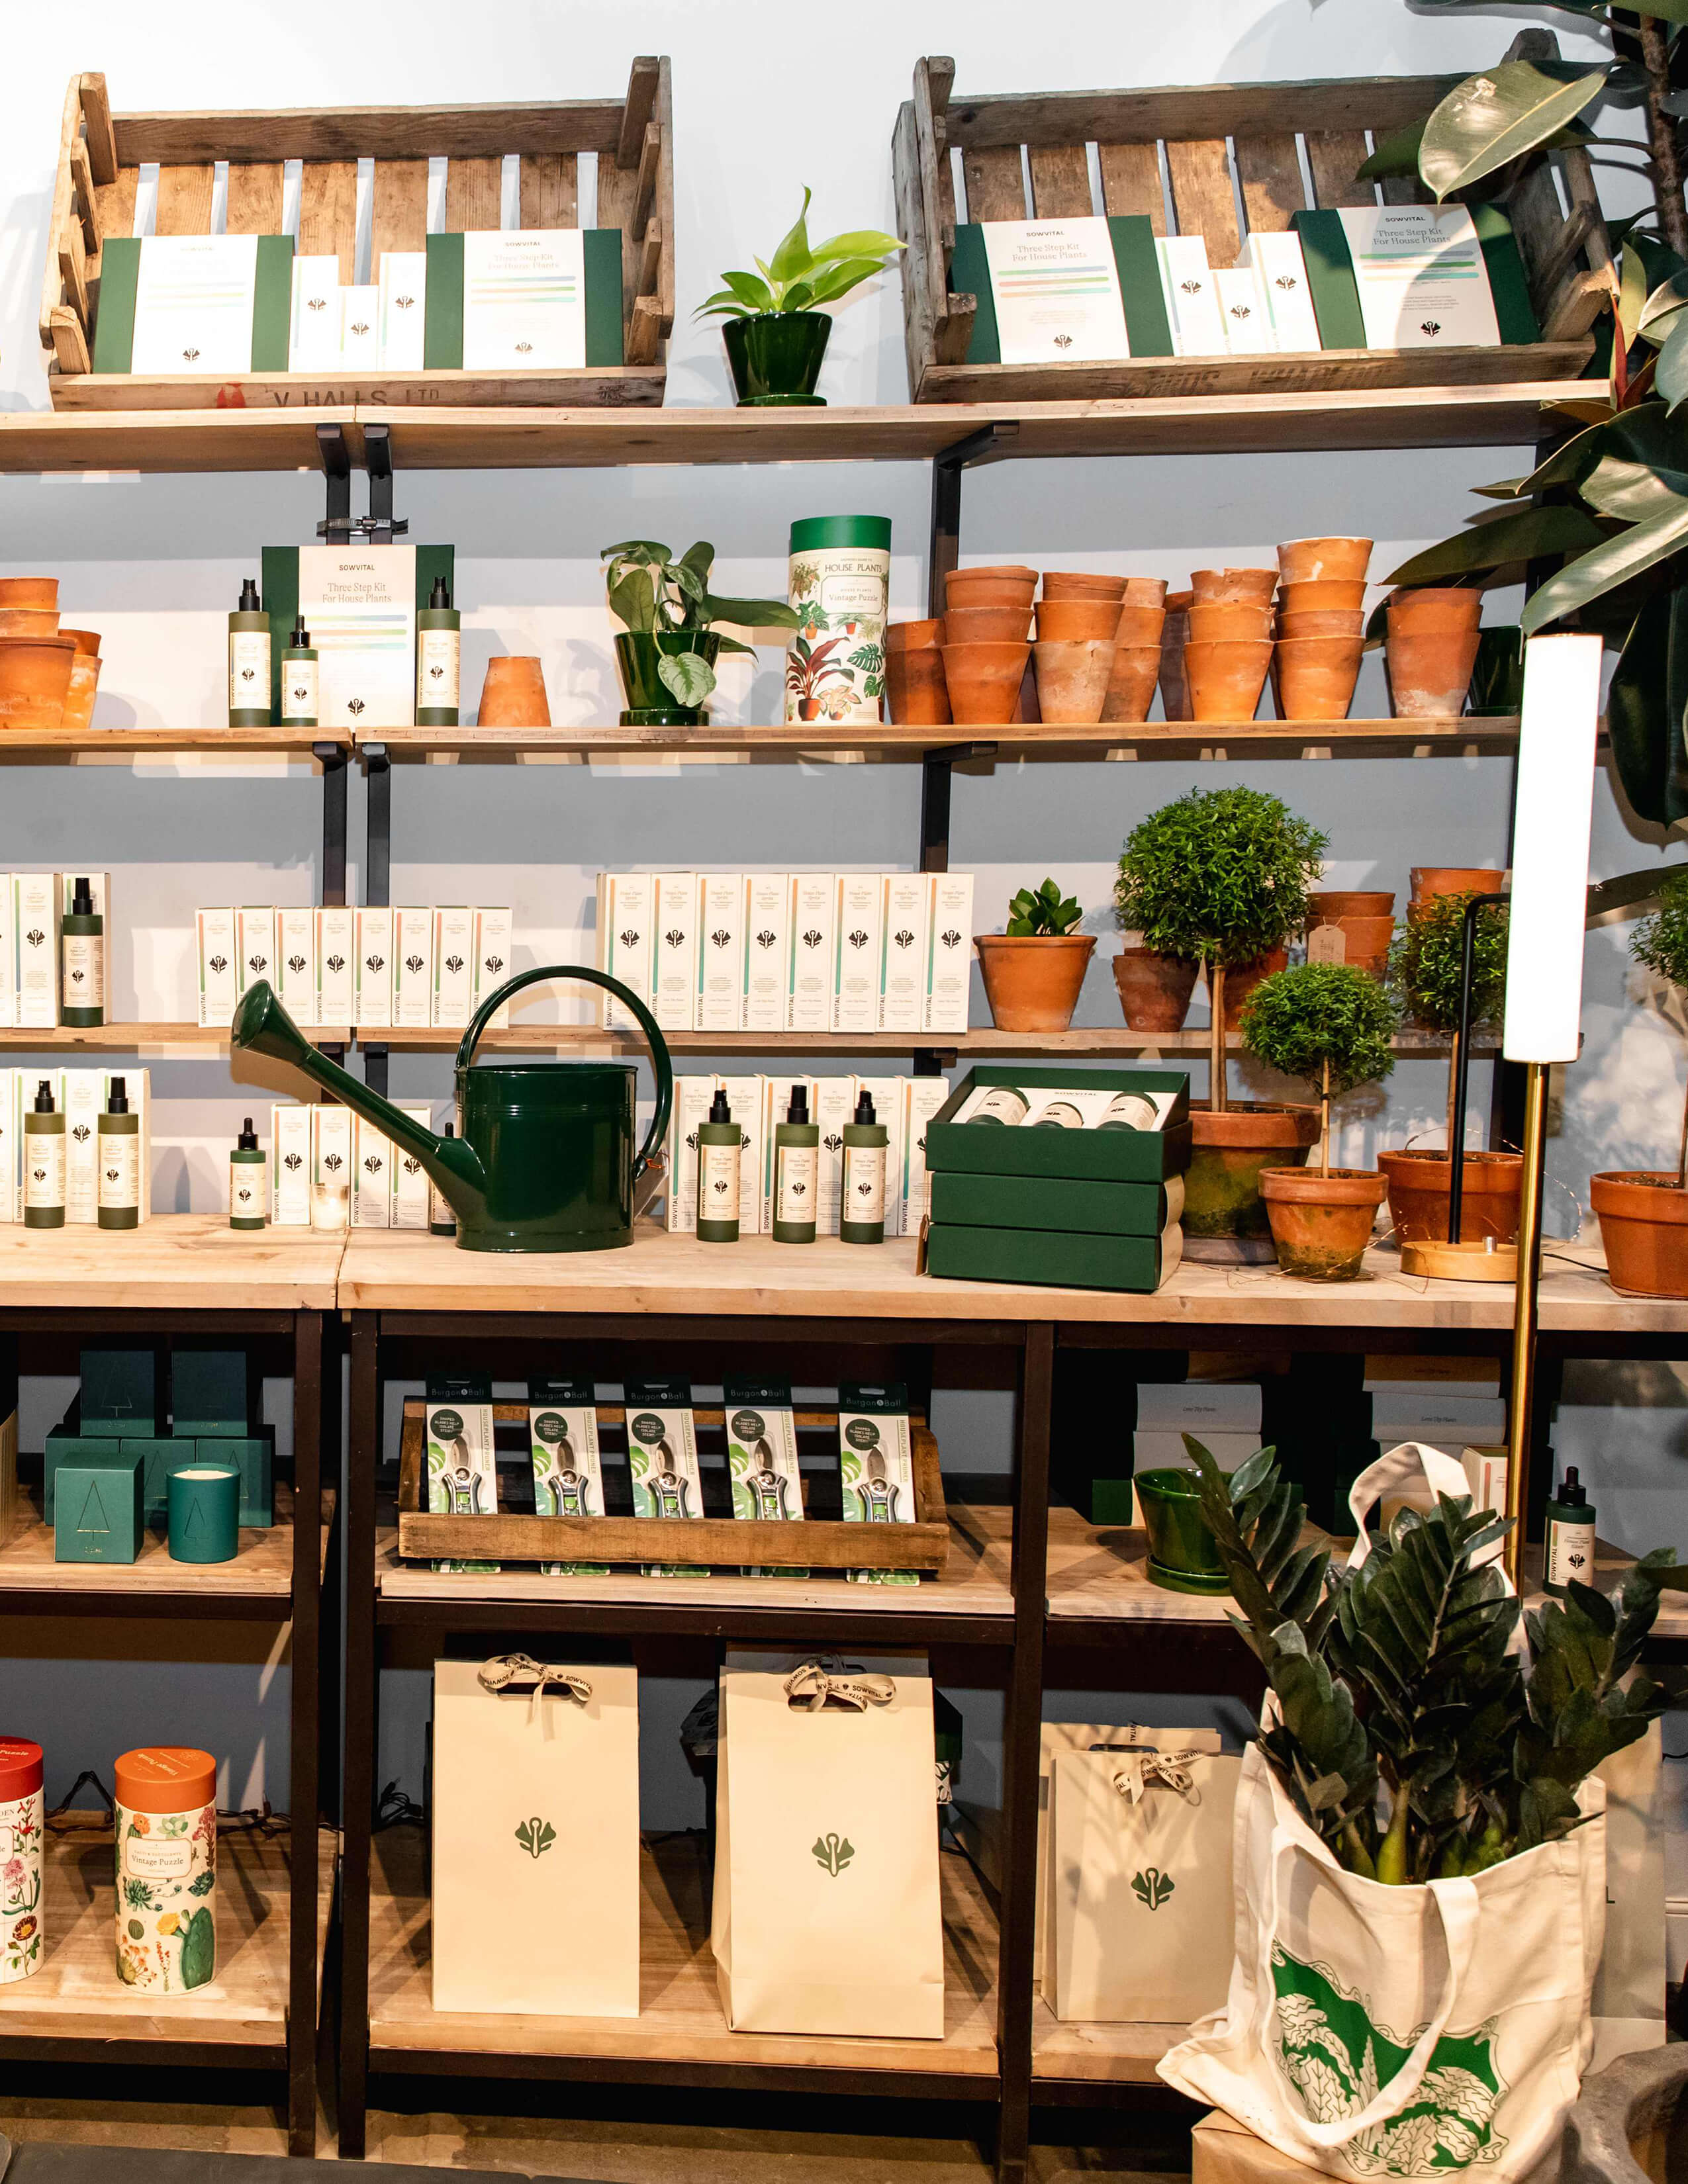 A collection of Sowvital house plant products is presented nicely on the shelf surrounded by some potted plants and there is a green water can in between the products too. Some gifting bags are on the lower shelf.